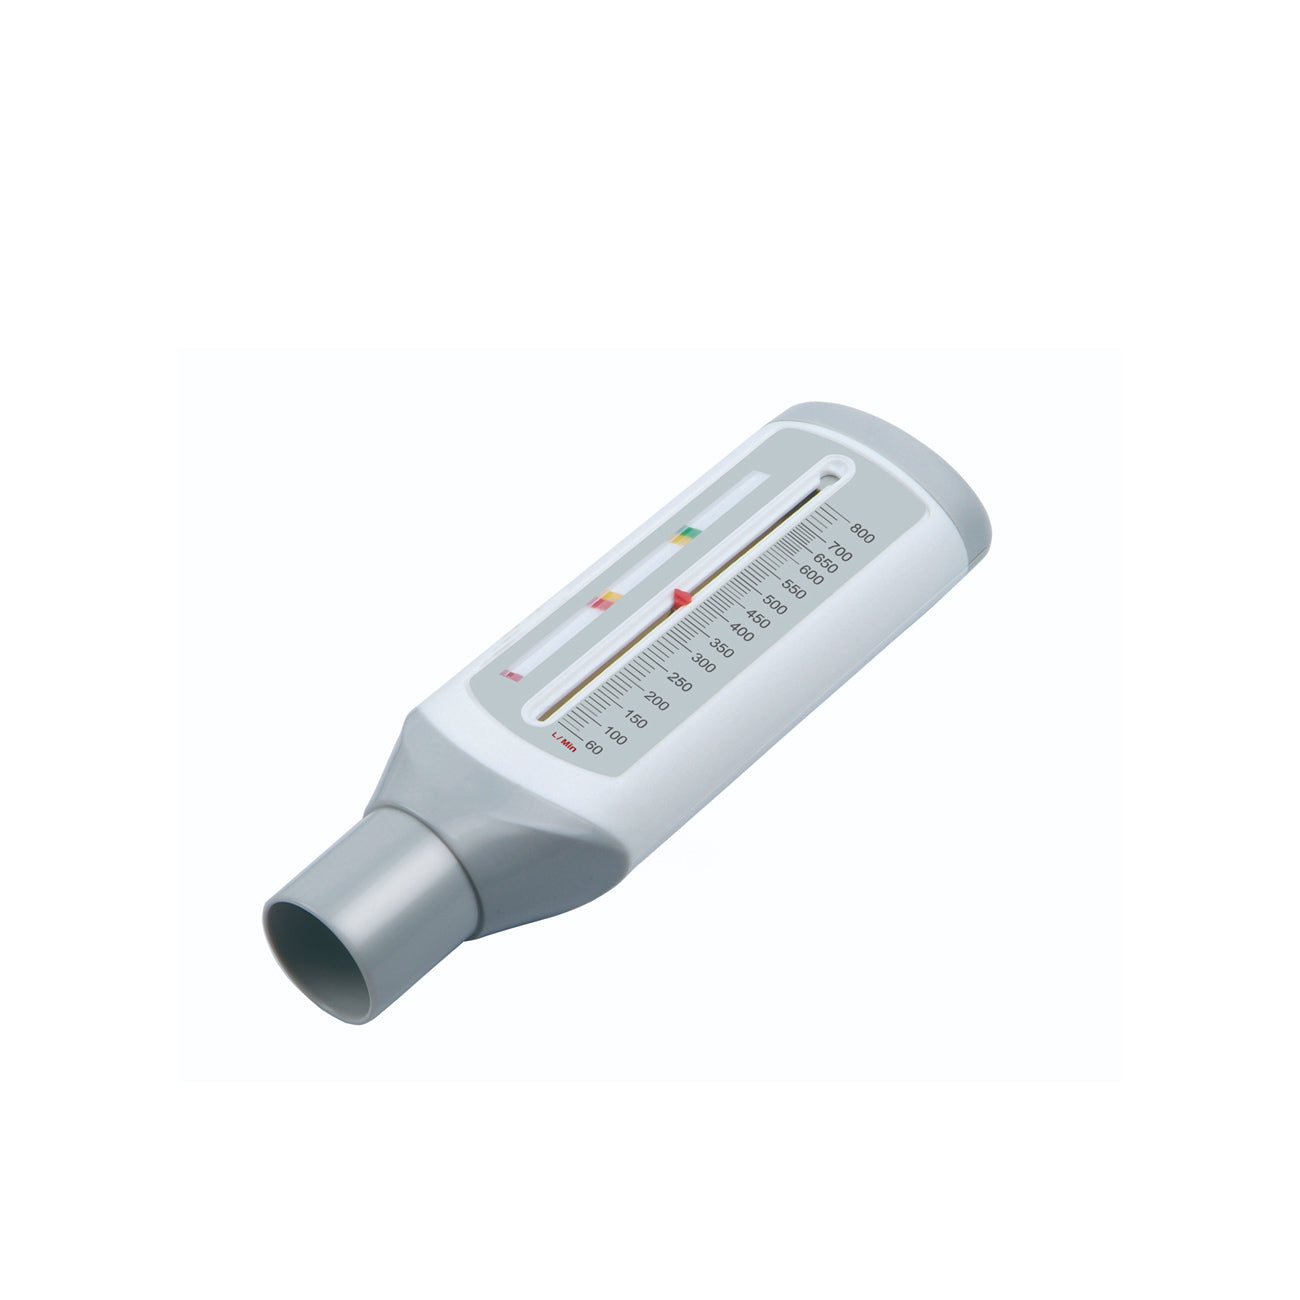 PF120A Peak Flow Meter with Color–coded indicators - MazenOnline